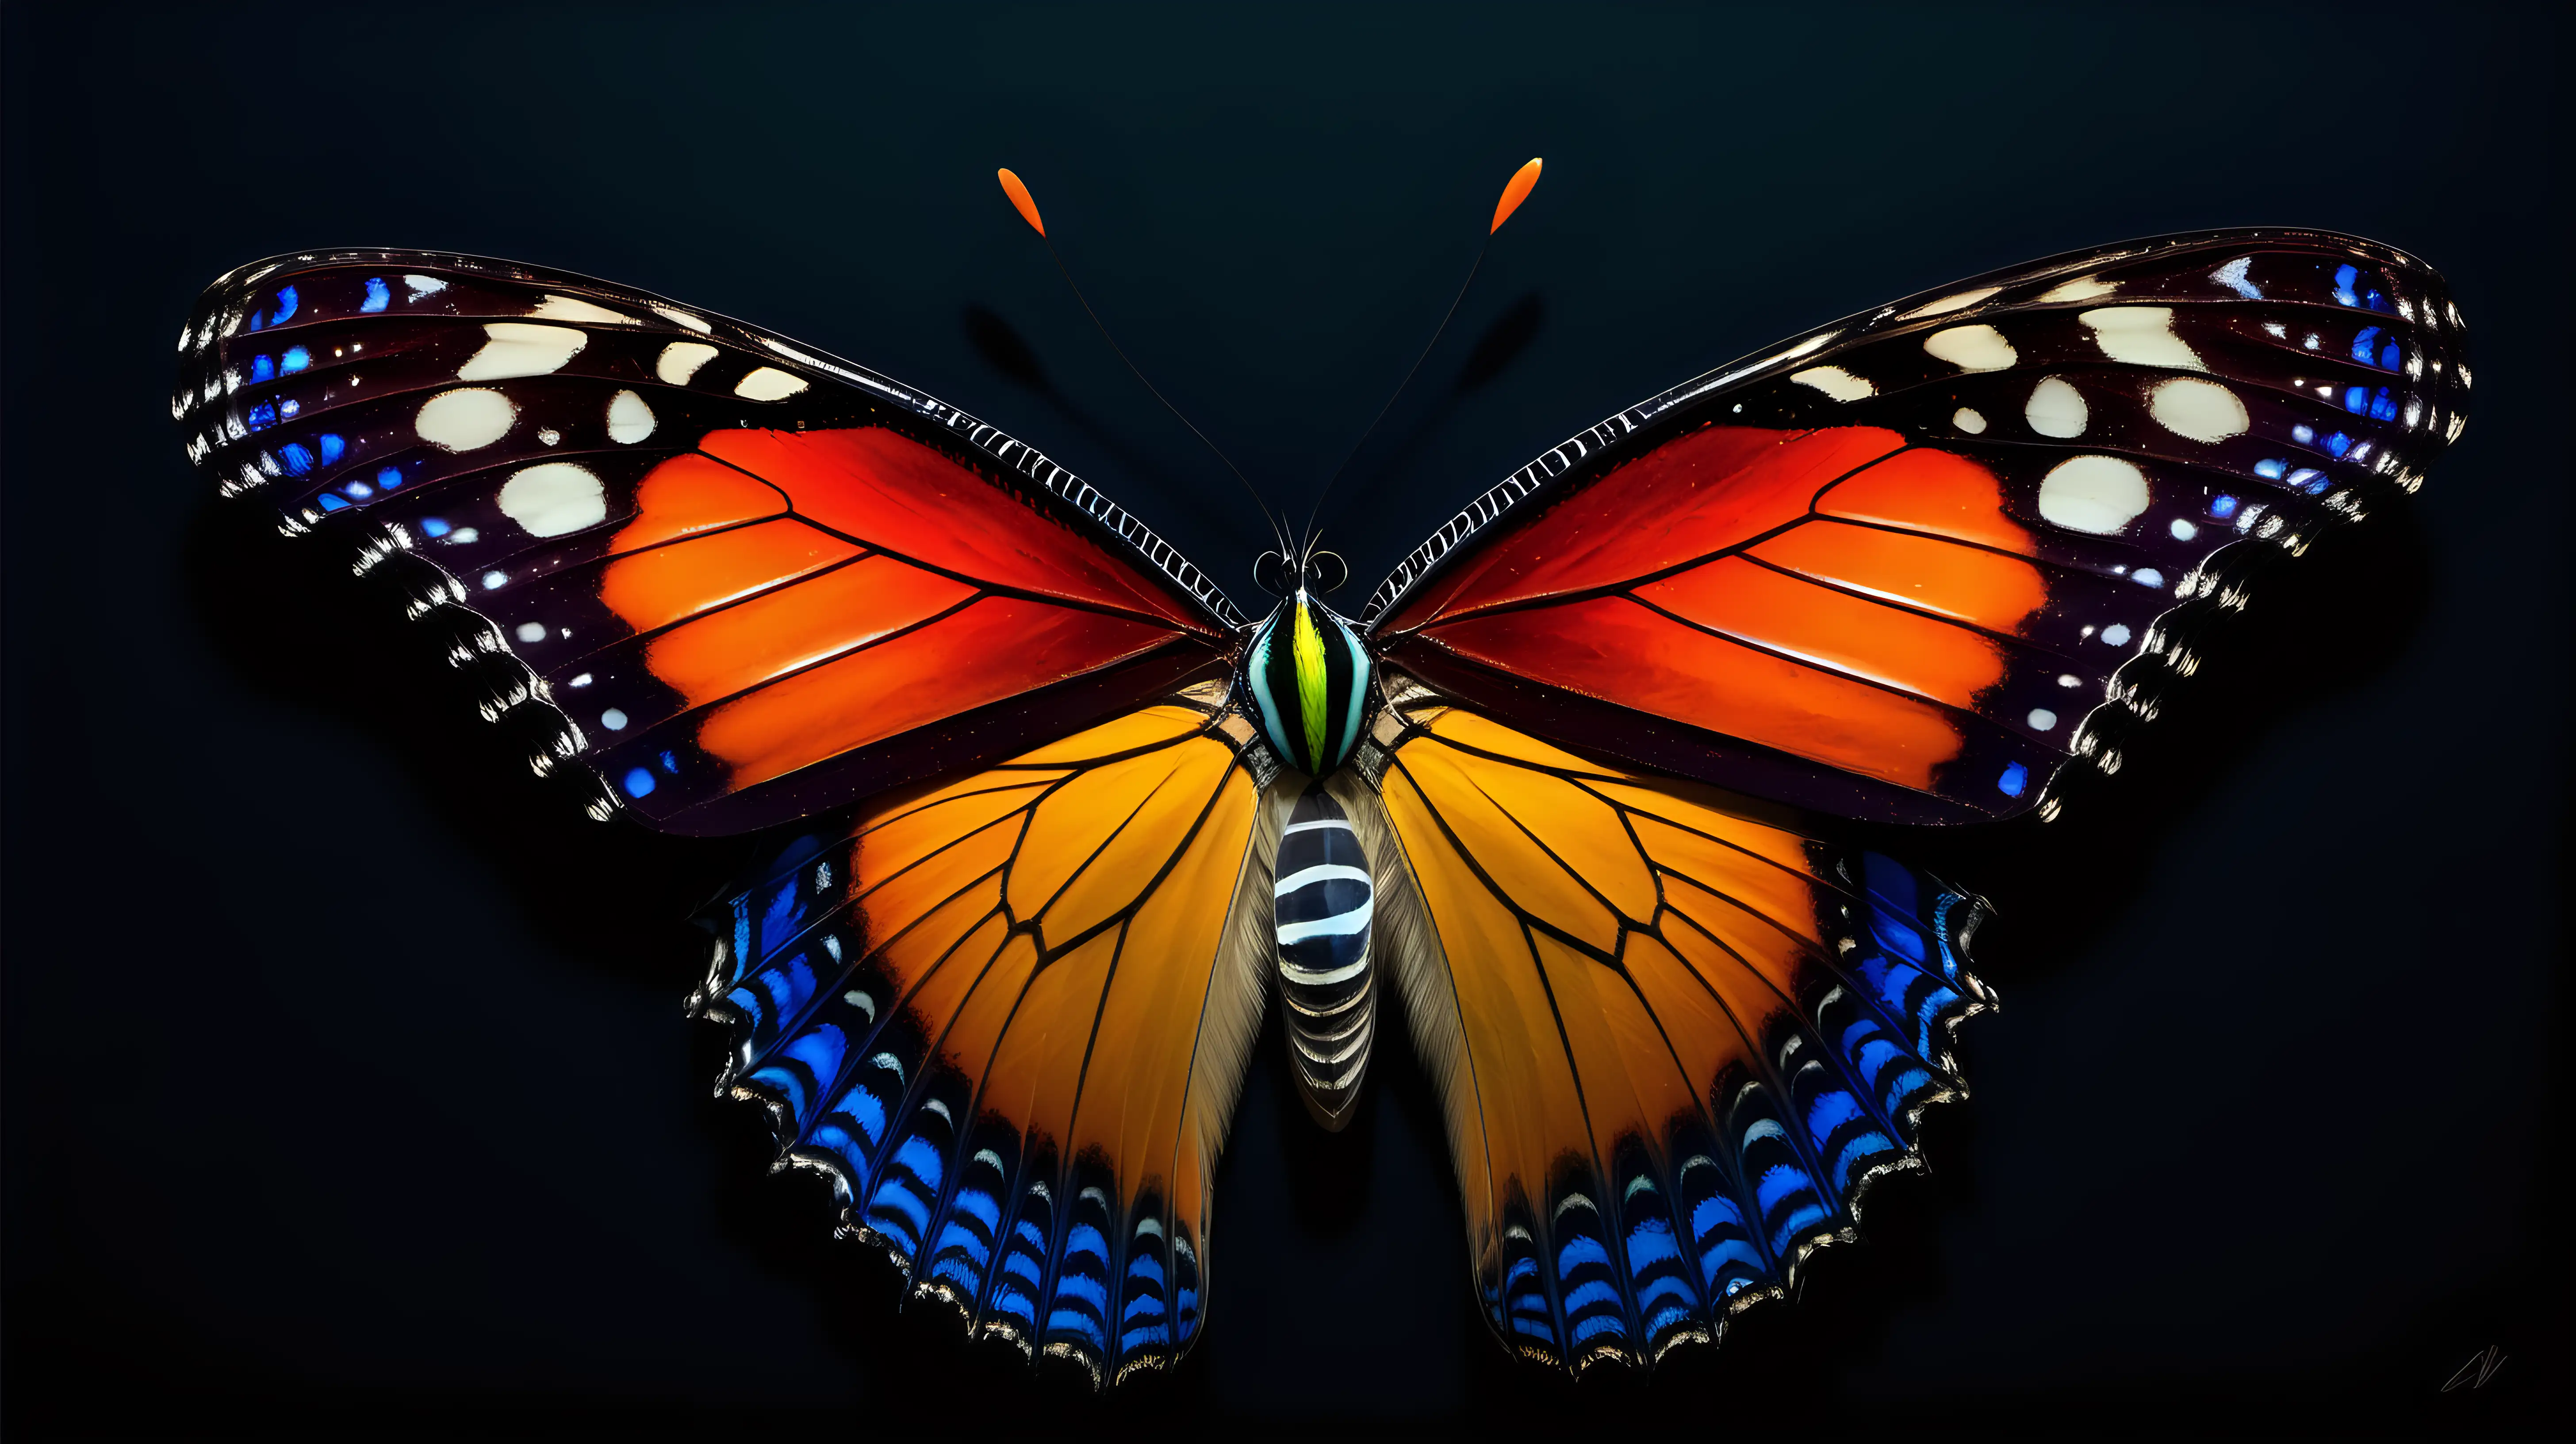 "In the void of darkness, let the vibrant colors of the butterfly's wings emerge, creating a striking visual contrast that captivates the viewer."